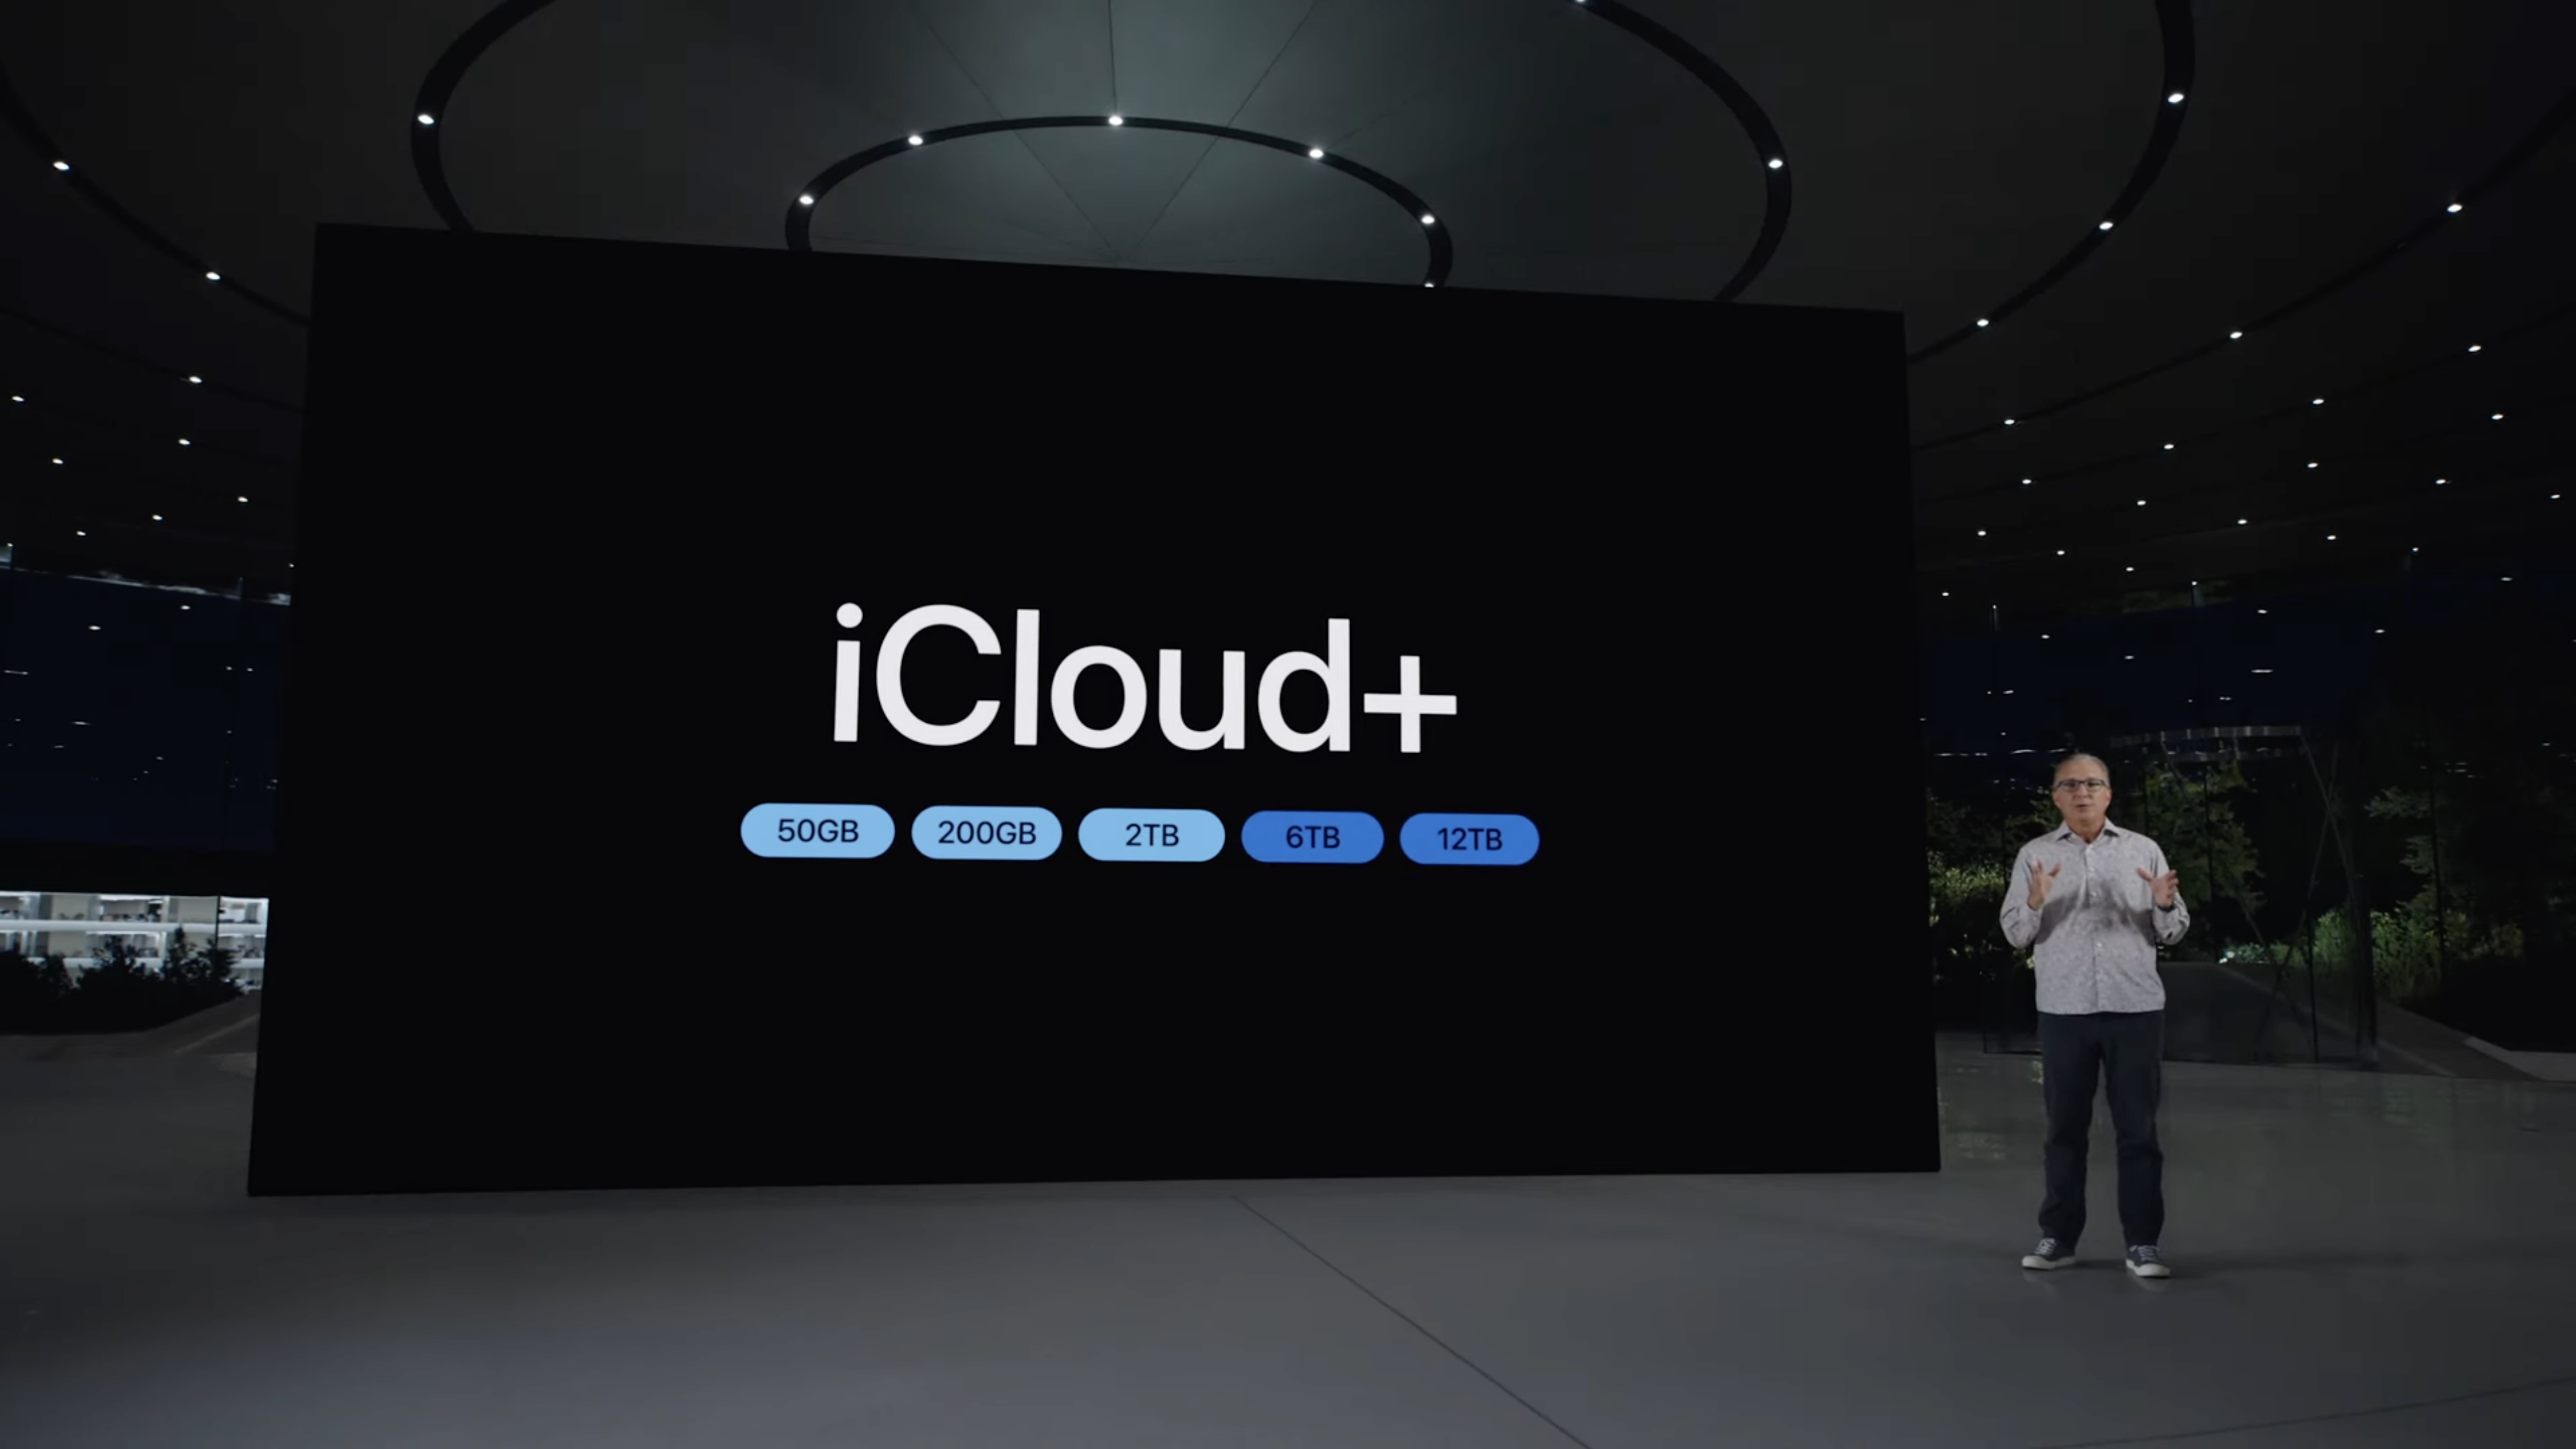 iCloud+ new subscription options